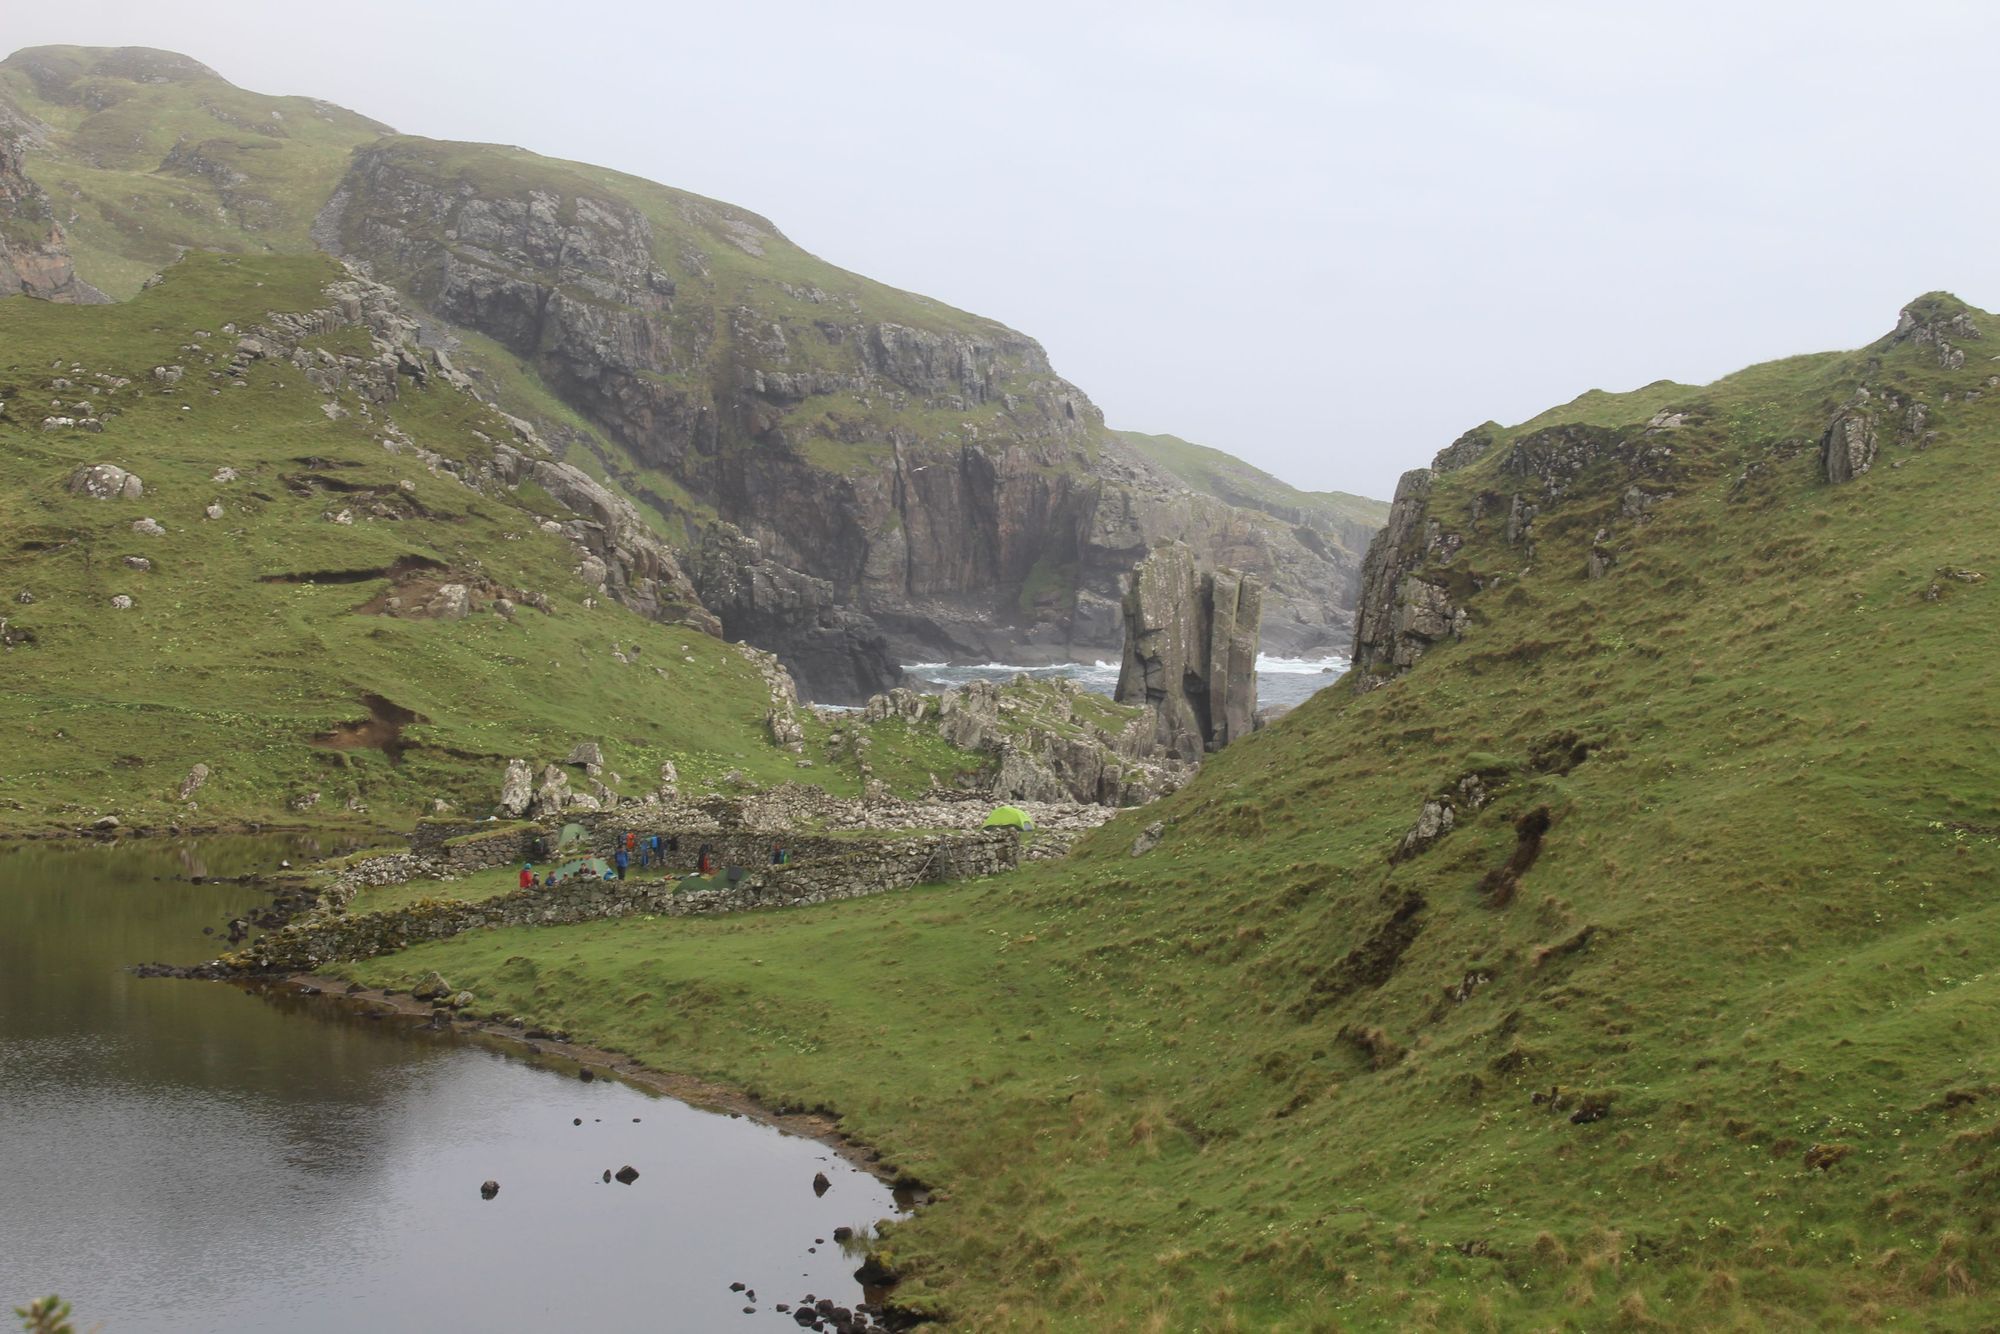 The entrance to Papadil is a scenic trail with a loch on the left, an old settlement in the centre and the sea stack and coastline beyond. Photo: Stuart Kenny